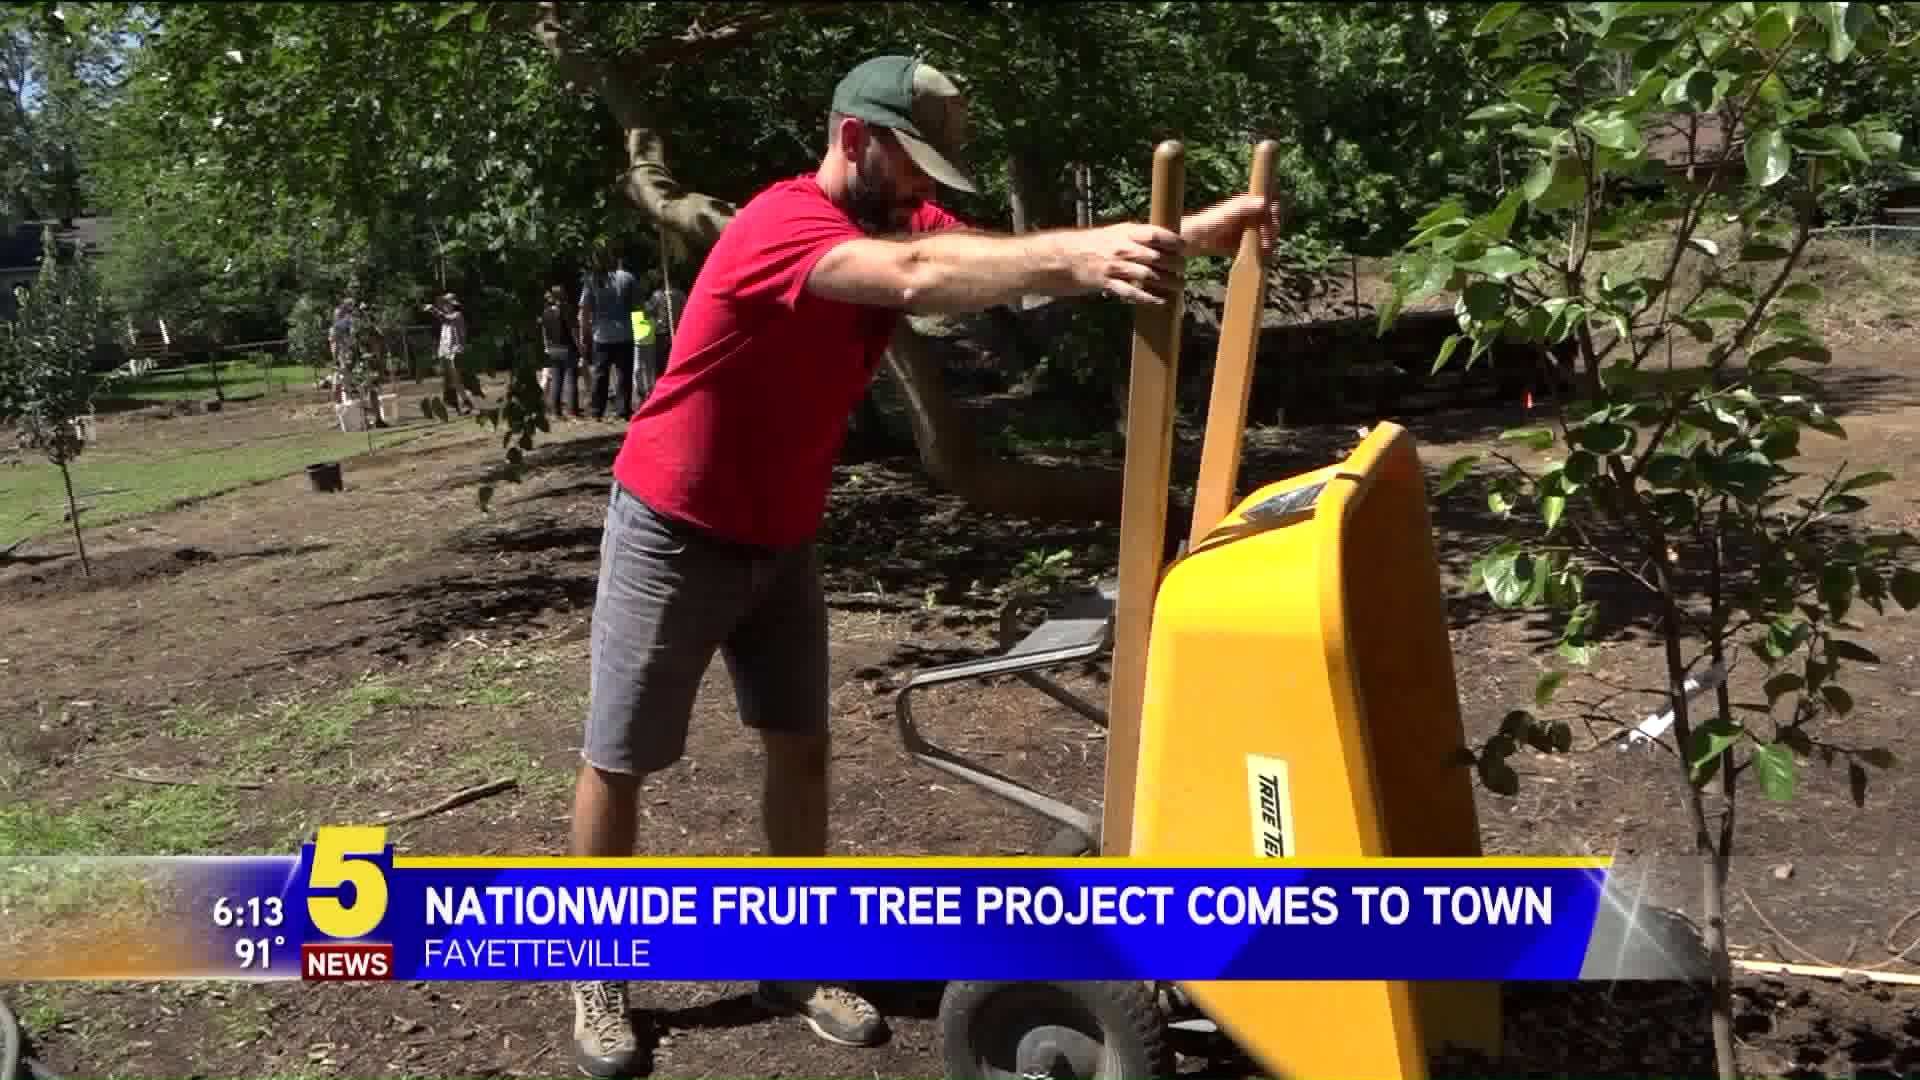 Nationwide Fruit Tree Project Comes To Town